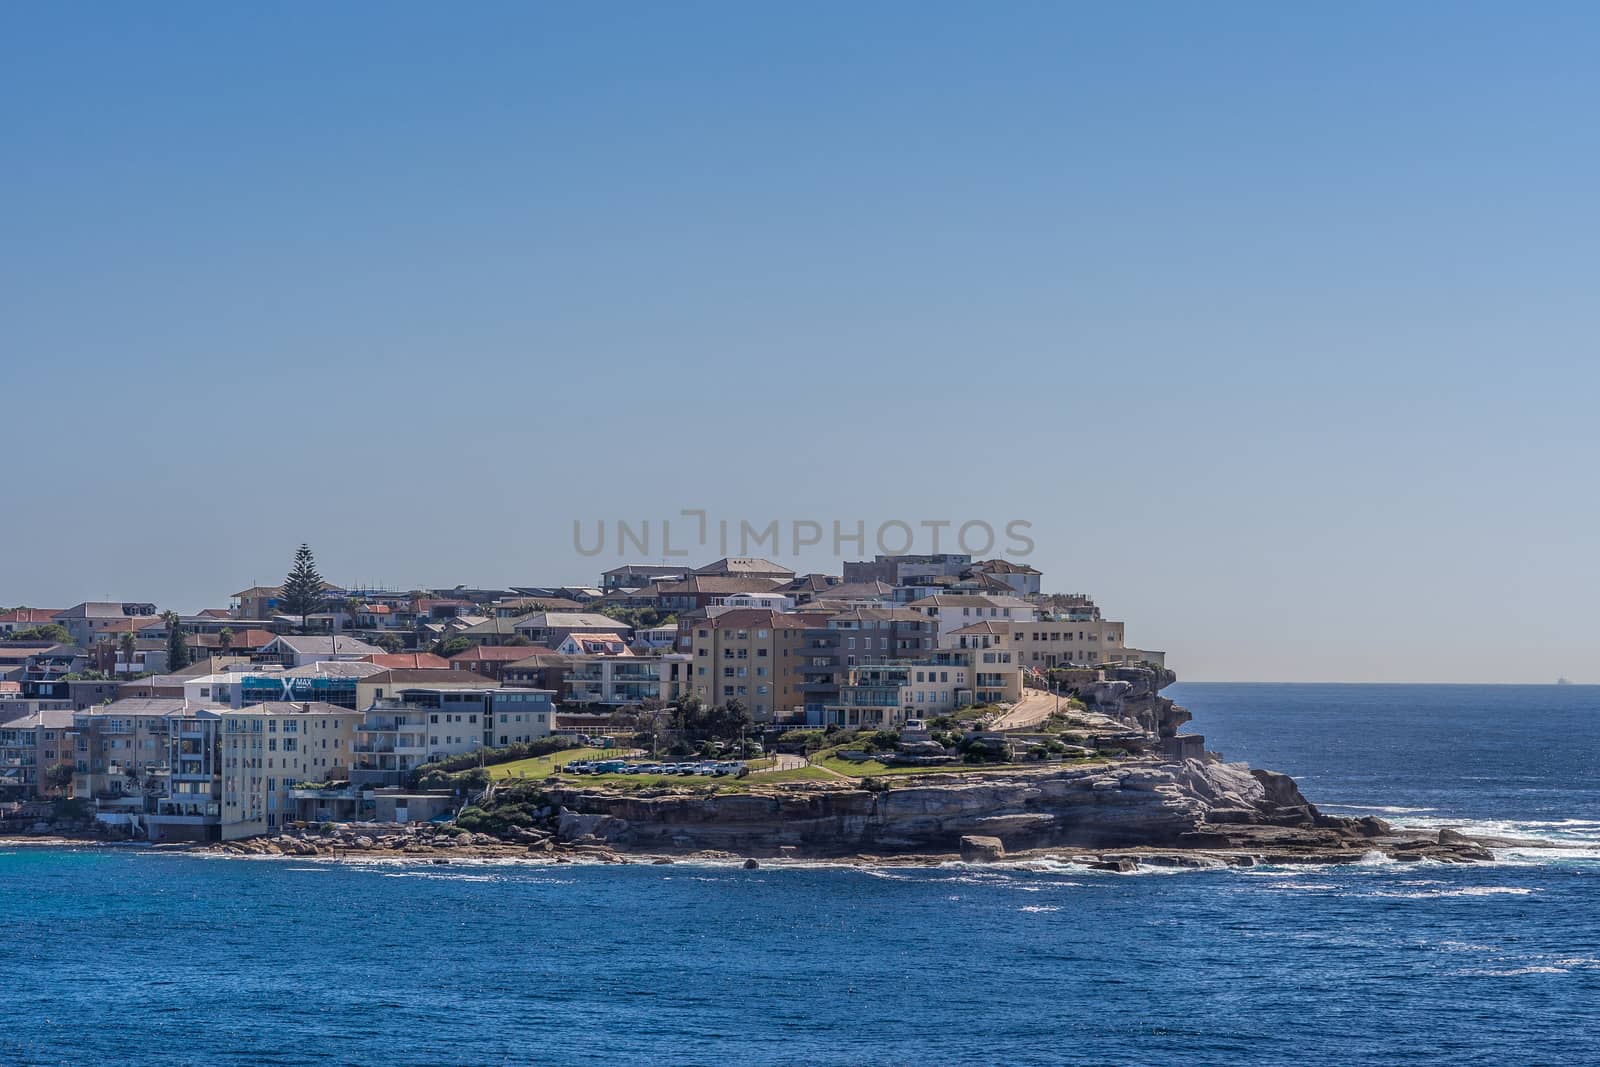 Sydney, Australia - February 11, 2019: Lands end with Sam Fiszman Park and buildings under blue sky and surrounded by blue sea water.